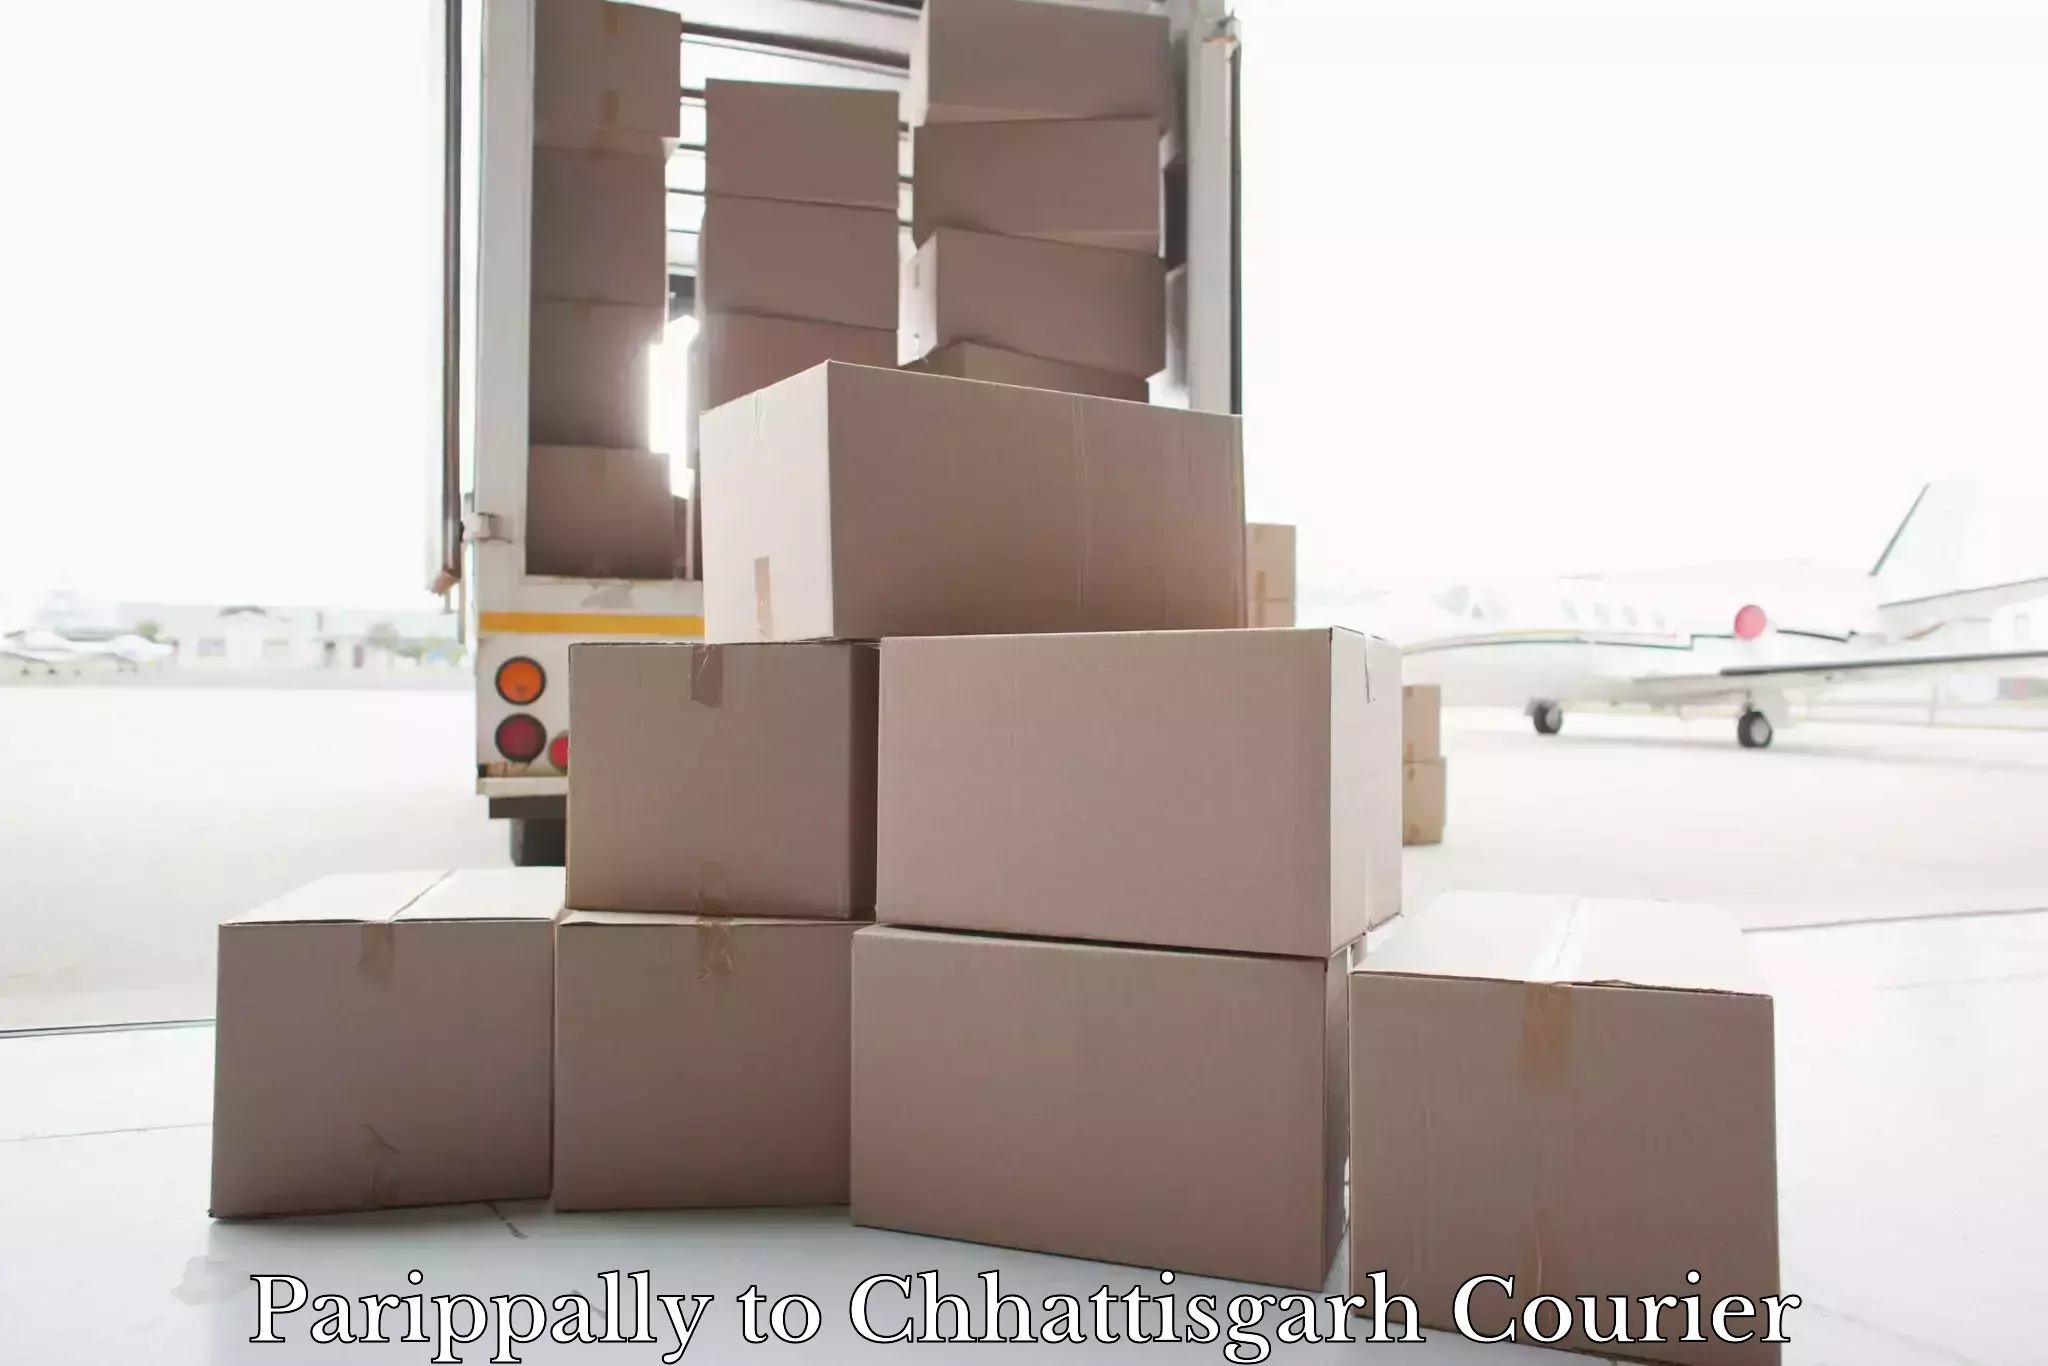 Baggage delivery scheduling Parippally to Chhattisgarh